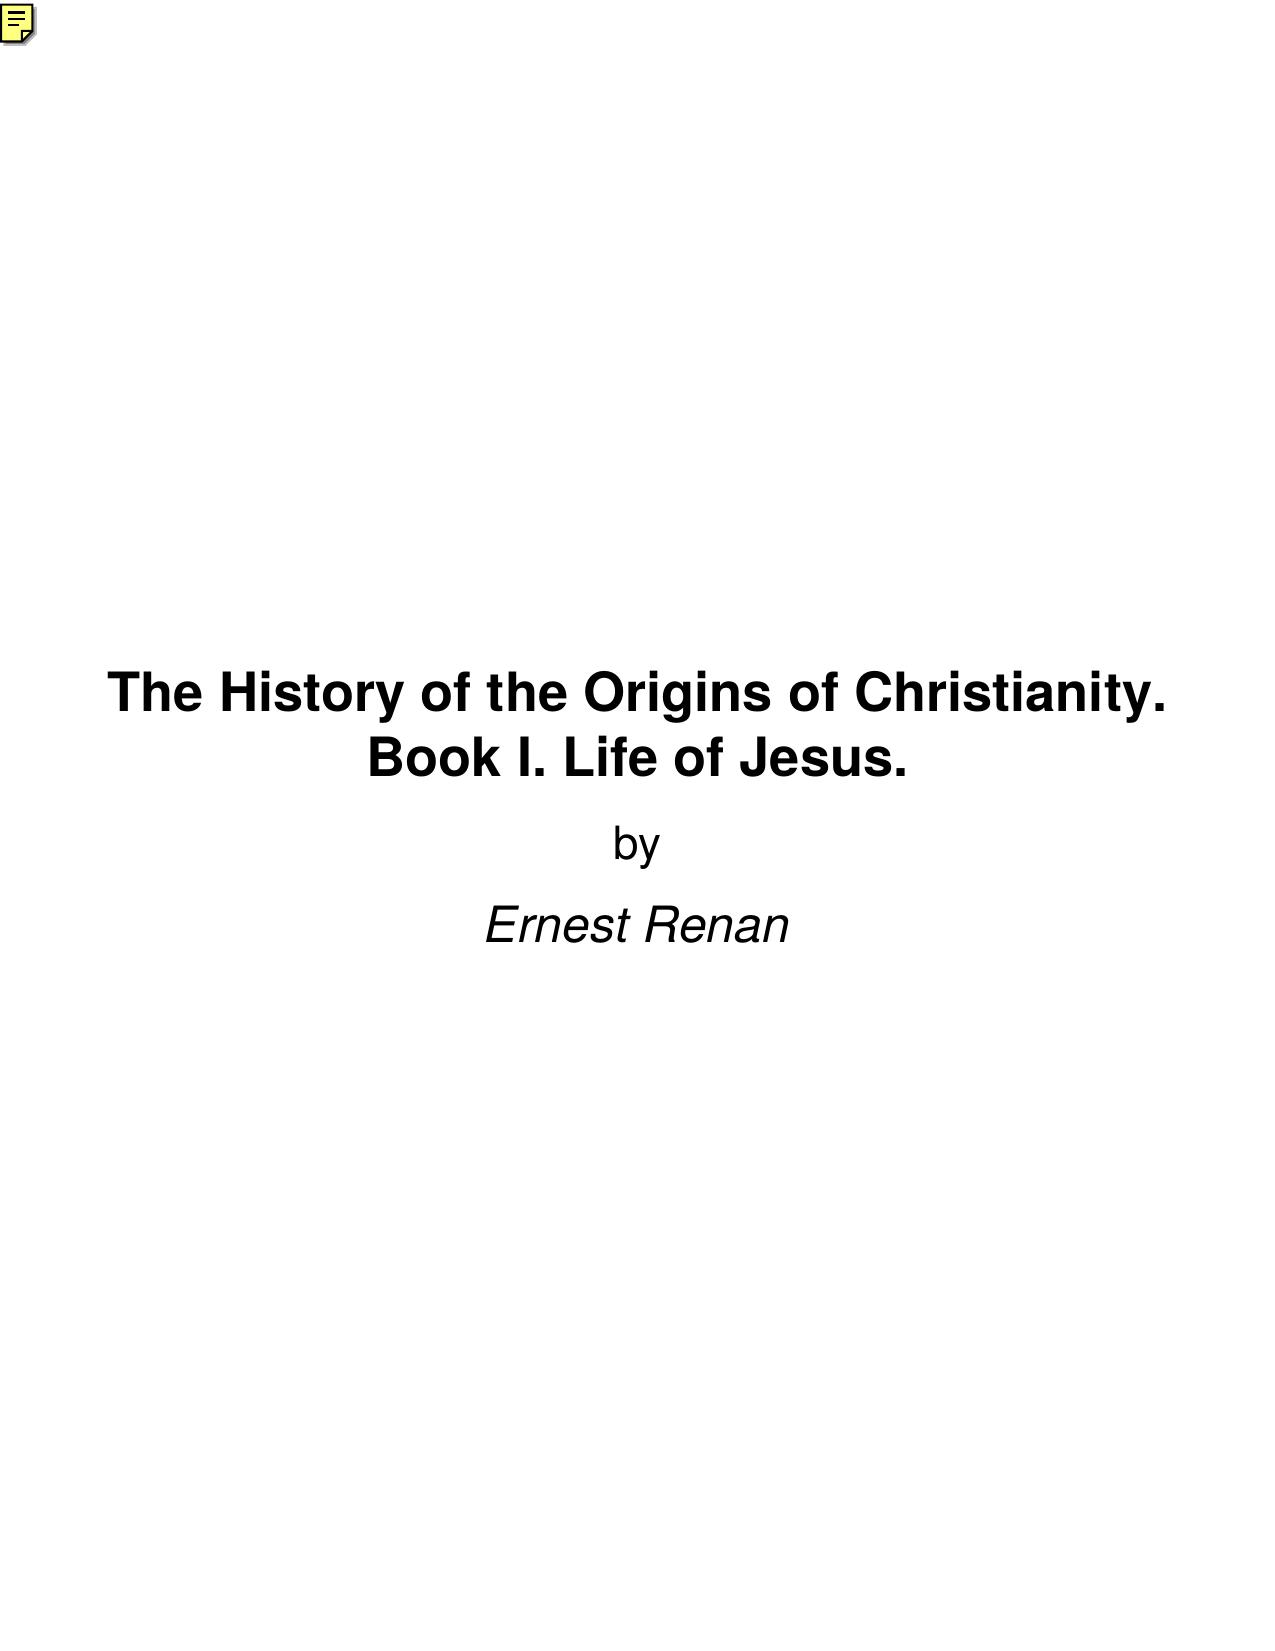 The History of the Origins of Christianity. Book I. Life of Jesus. by Ernest Renan